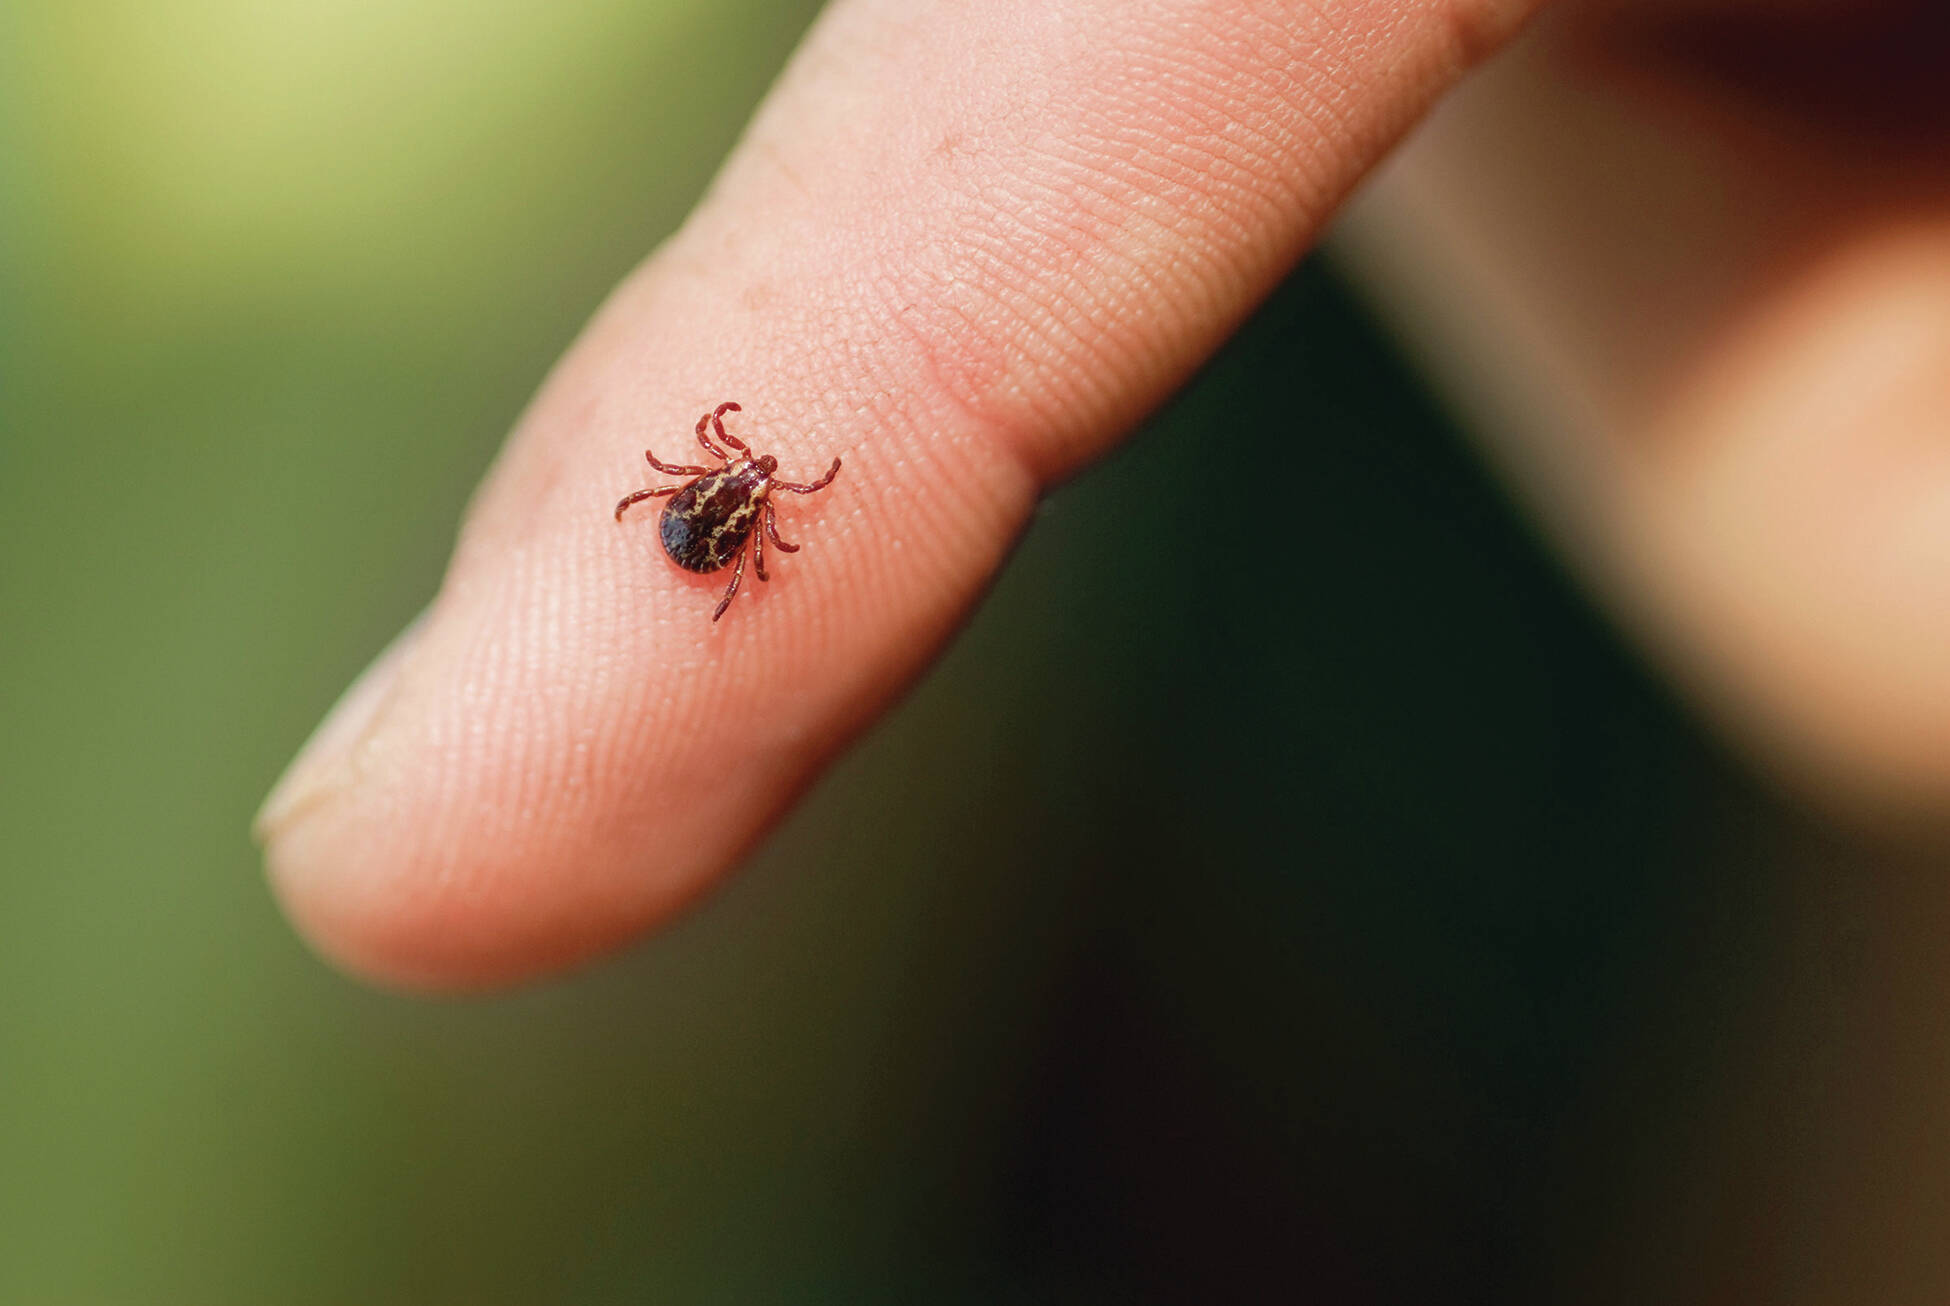 First locally acquired human case of tick-borne anaplasmosis found in Washington state